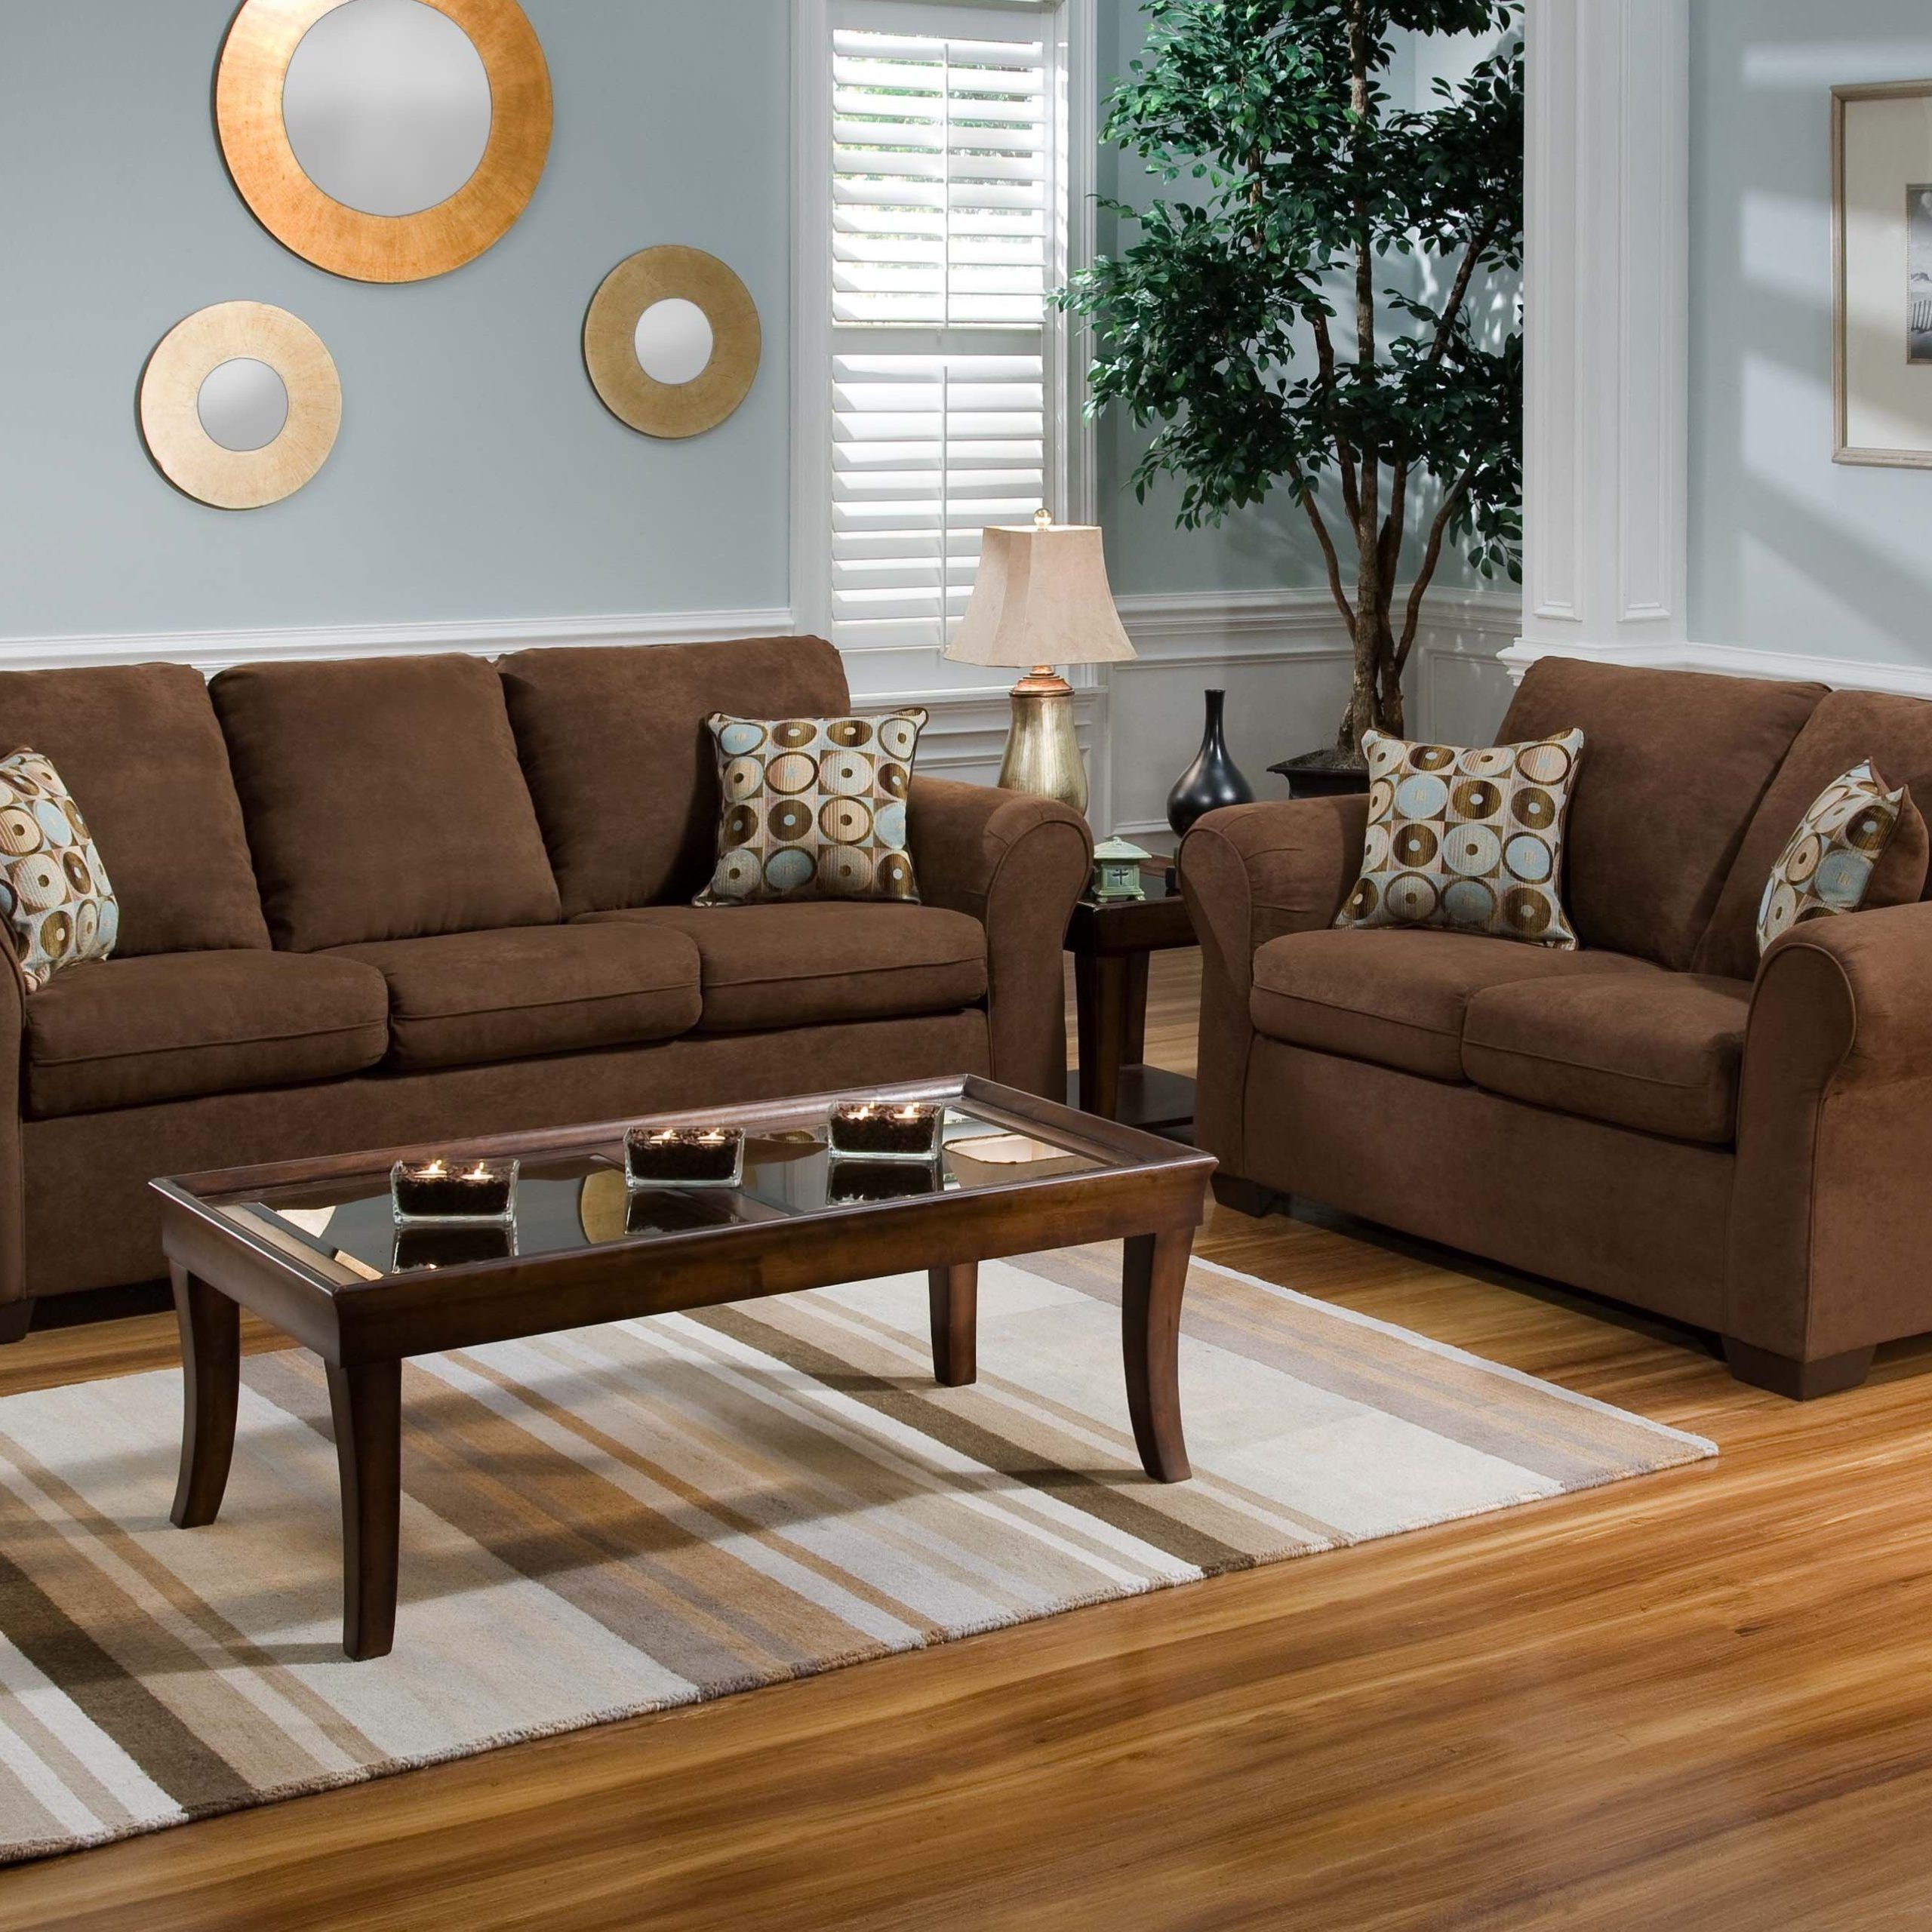 Wood Flooring Color To Complement Brown Leather And Oak Furniture With Sofas In Chocolate Brown (View 9 of 20)